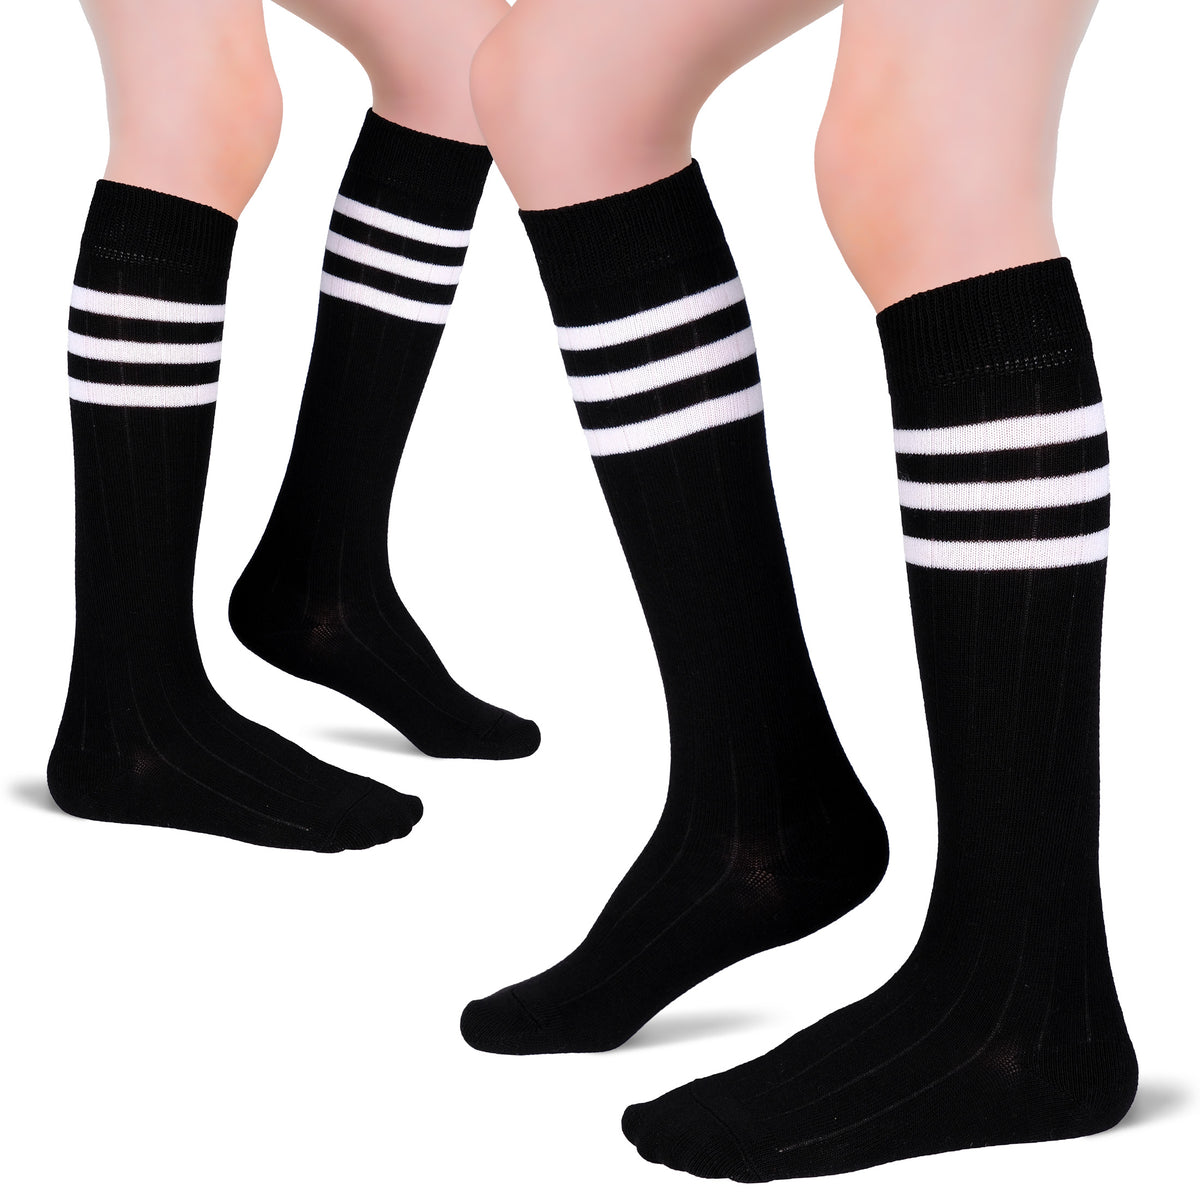 Elevate your child's wardrobe with these Cotton Kids' Knee-High Socks that include two pairs of black socks adorned with white stripes. A must-have for any fashion-conscious kid.